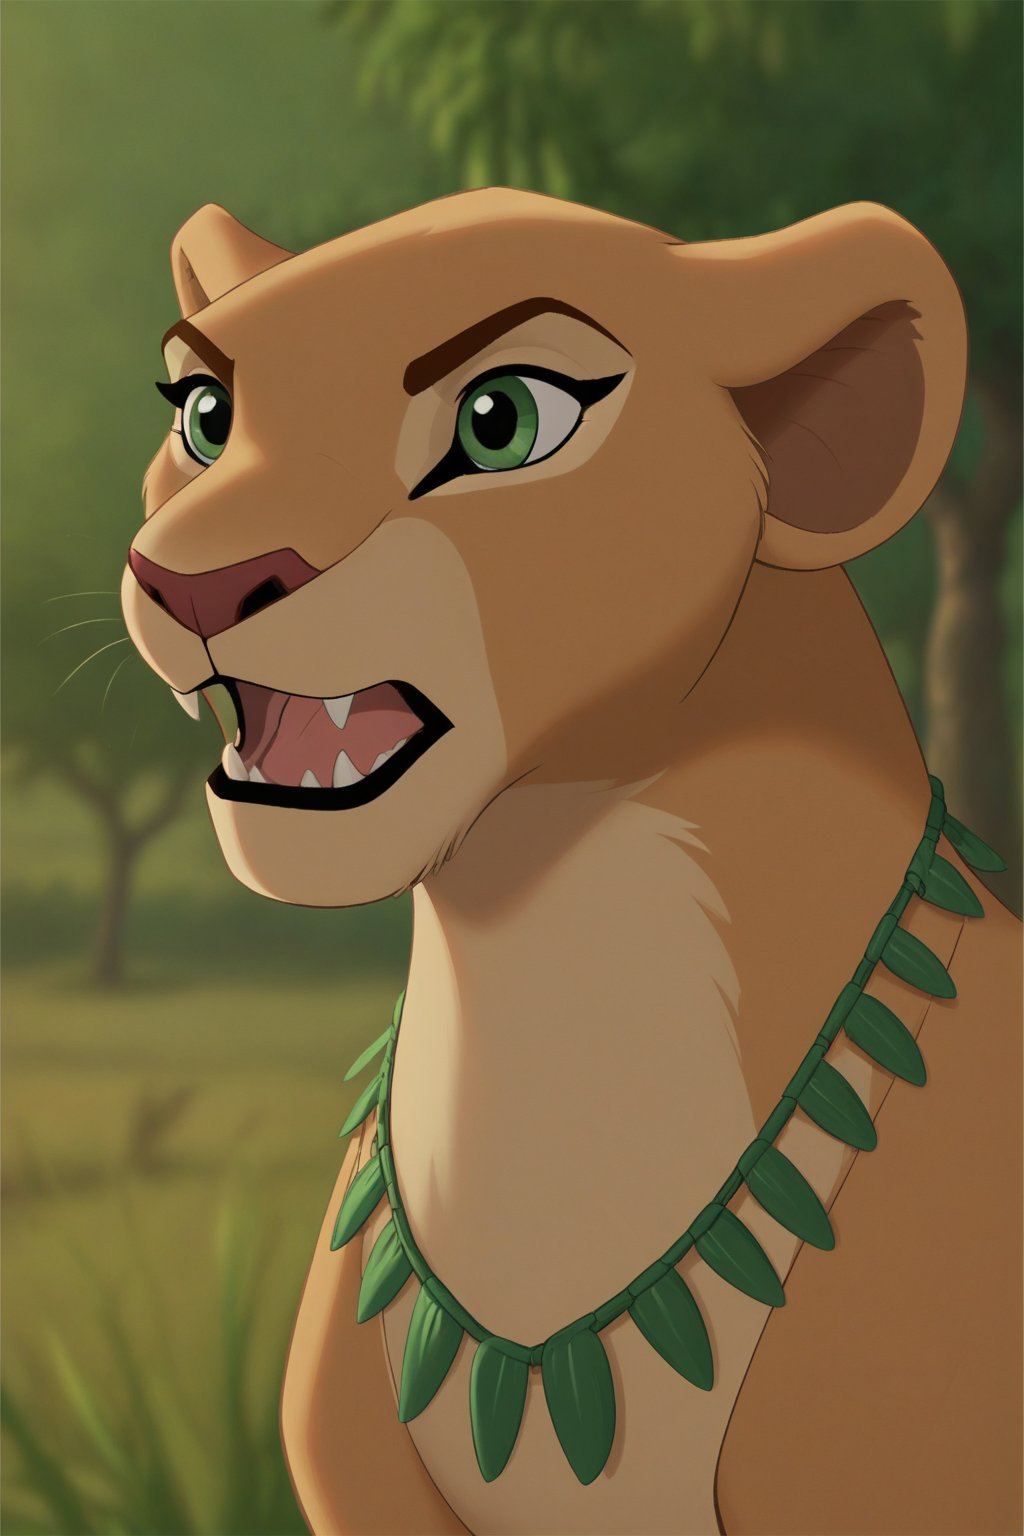 score_9, score_8_up, score_7_up, score_6_up, score_5_up, score_4_up, (bright diffused lighting, vivid, intense, intricate details, highly detailed:1.2),
BREAK,
Nala, female, furry, tribal dress, beige fur, green eyes, snarl, open mouth, savanna, detailed background, more detail XL